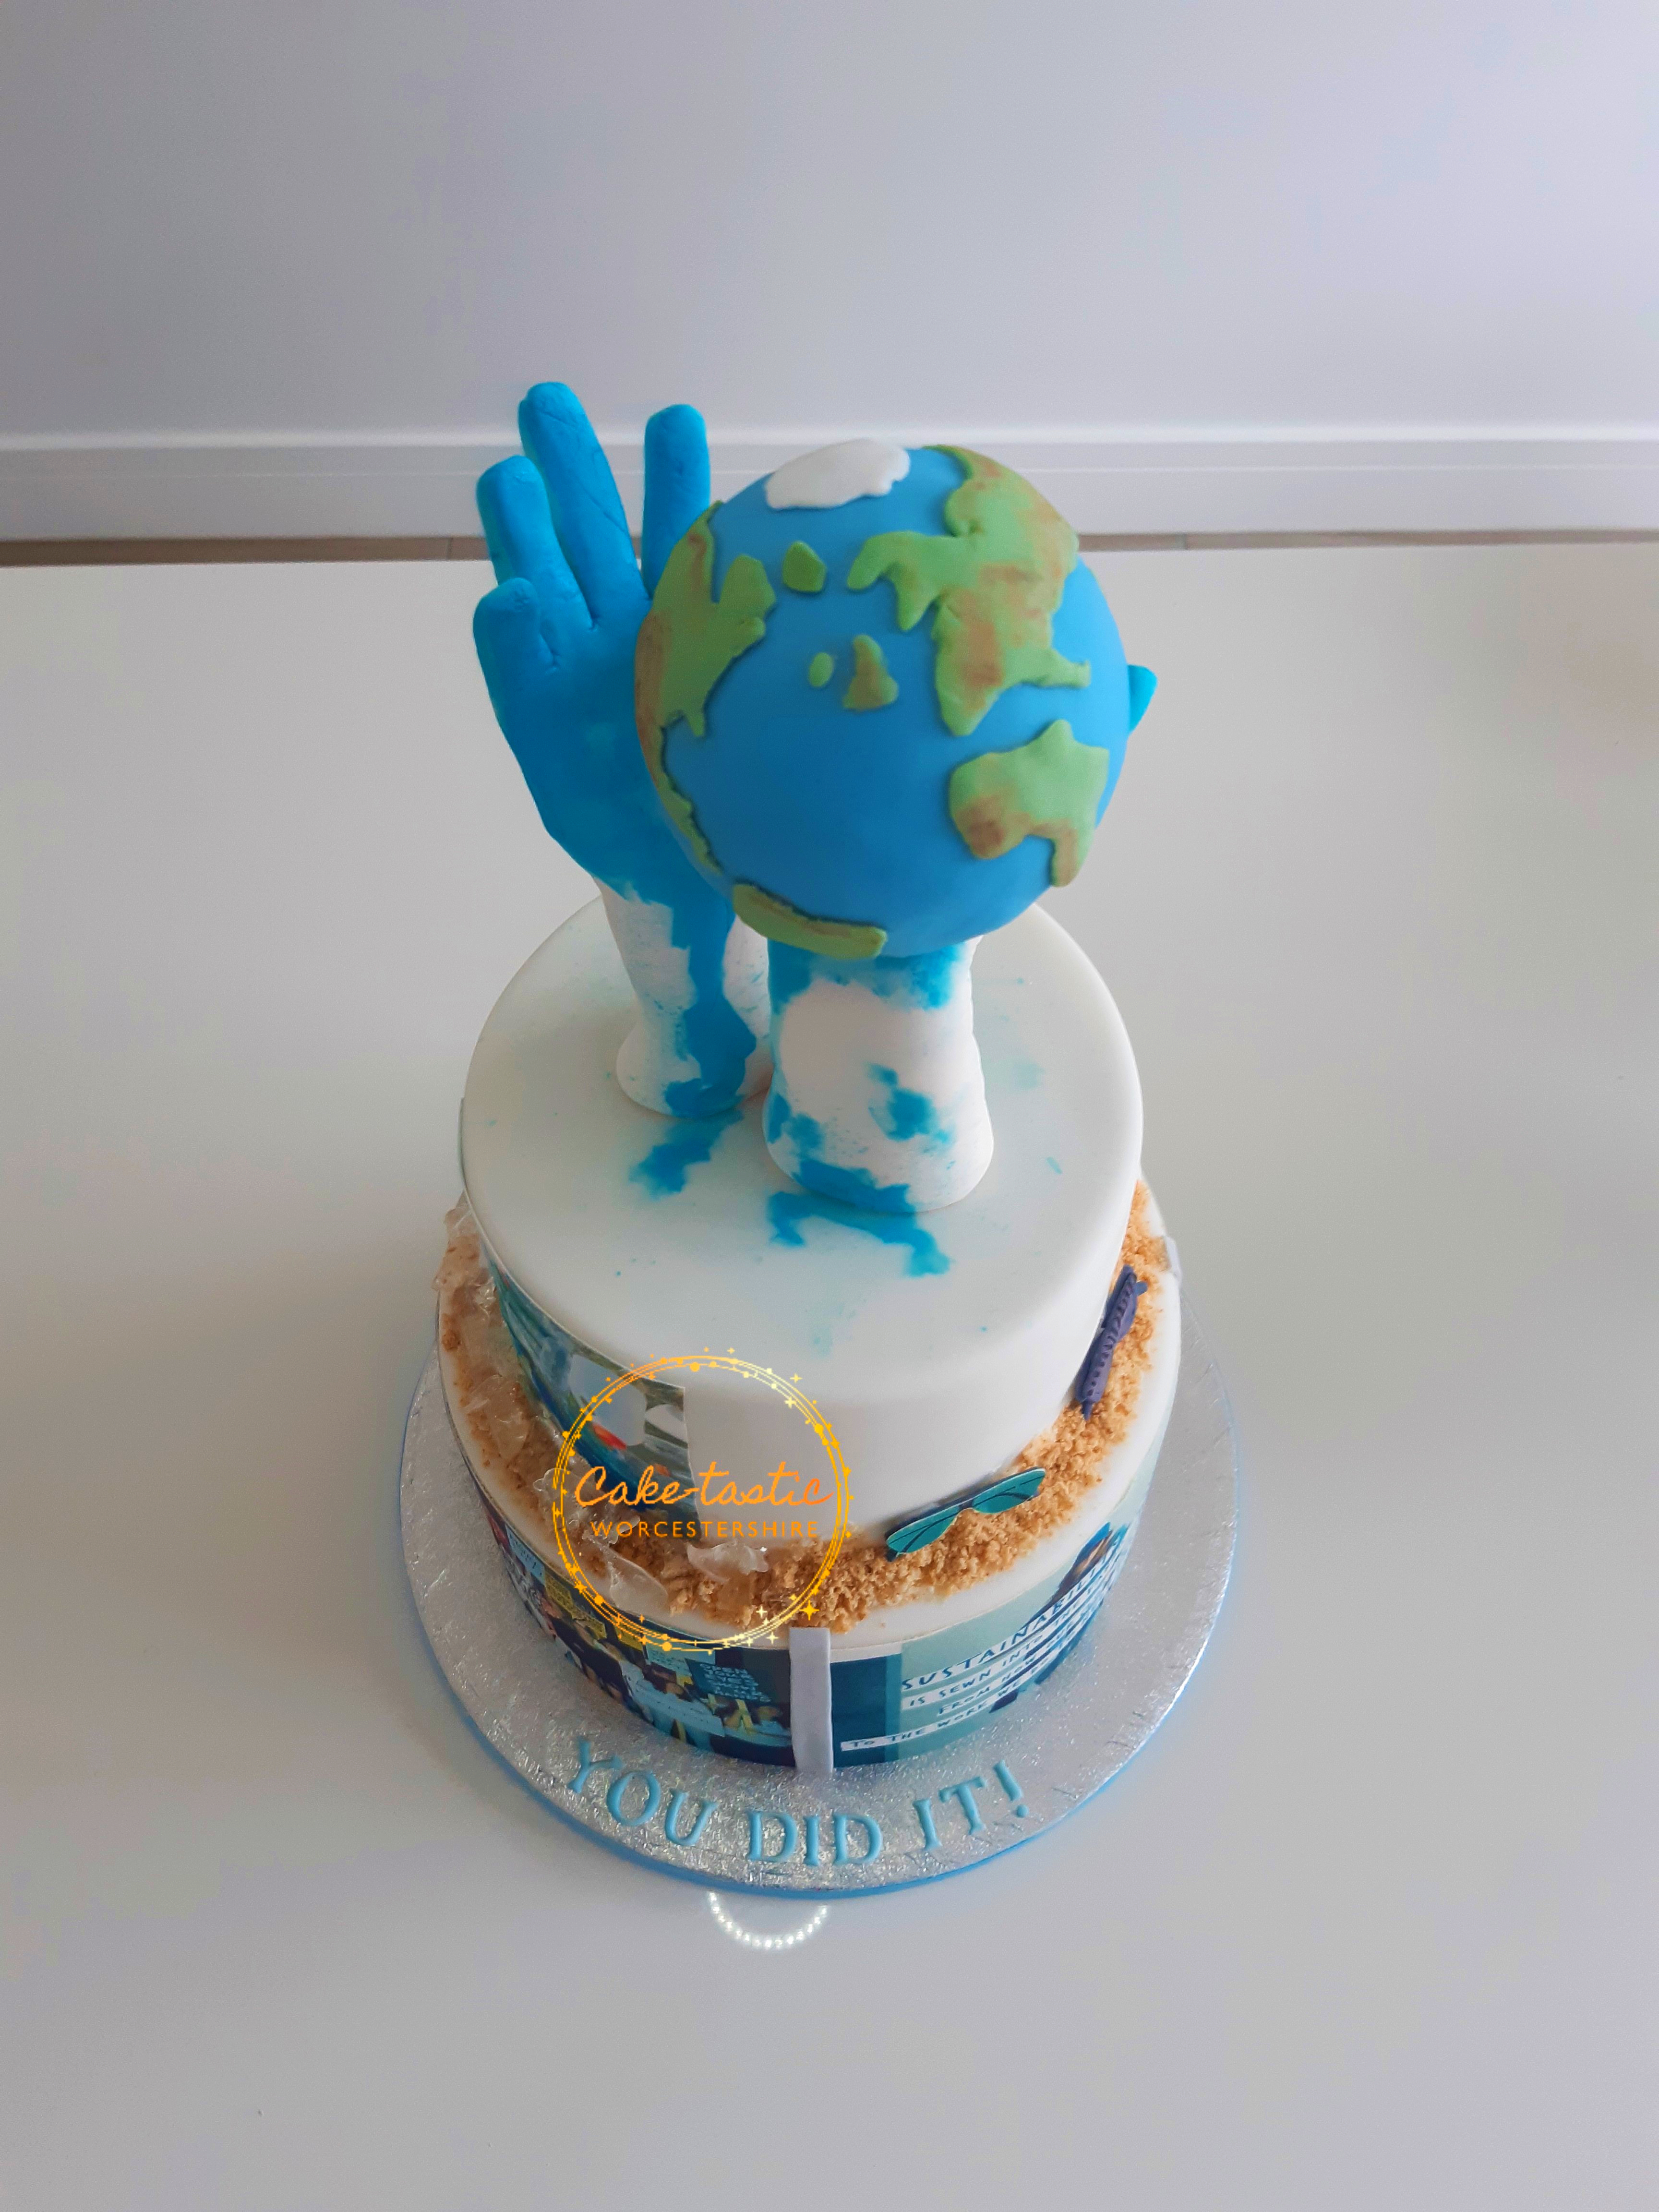 World in your hands cake